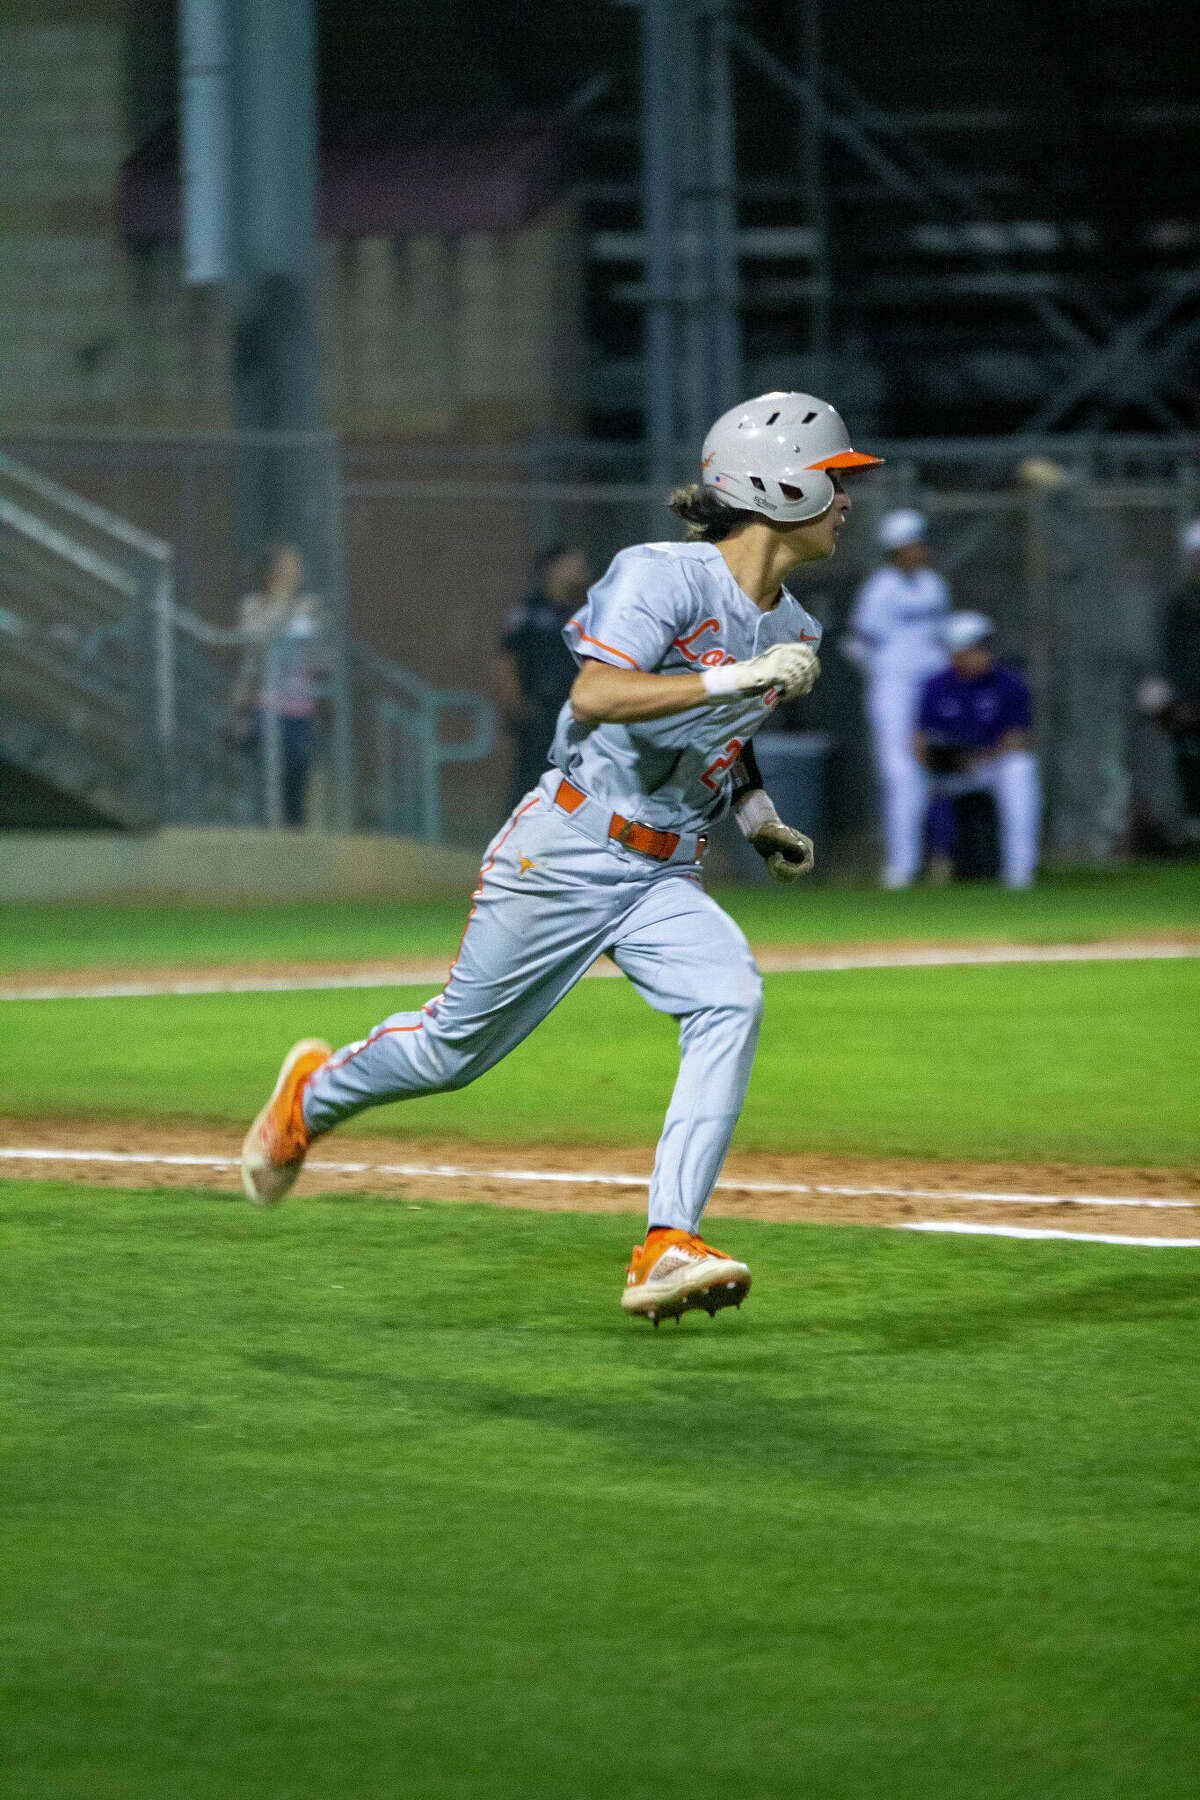 United's AJ Sanchez recorded four RBIs in Tuesday's win over LBJ.